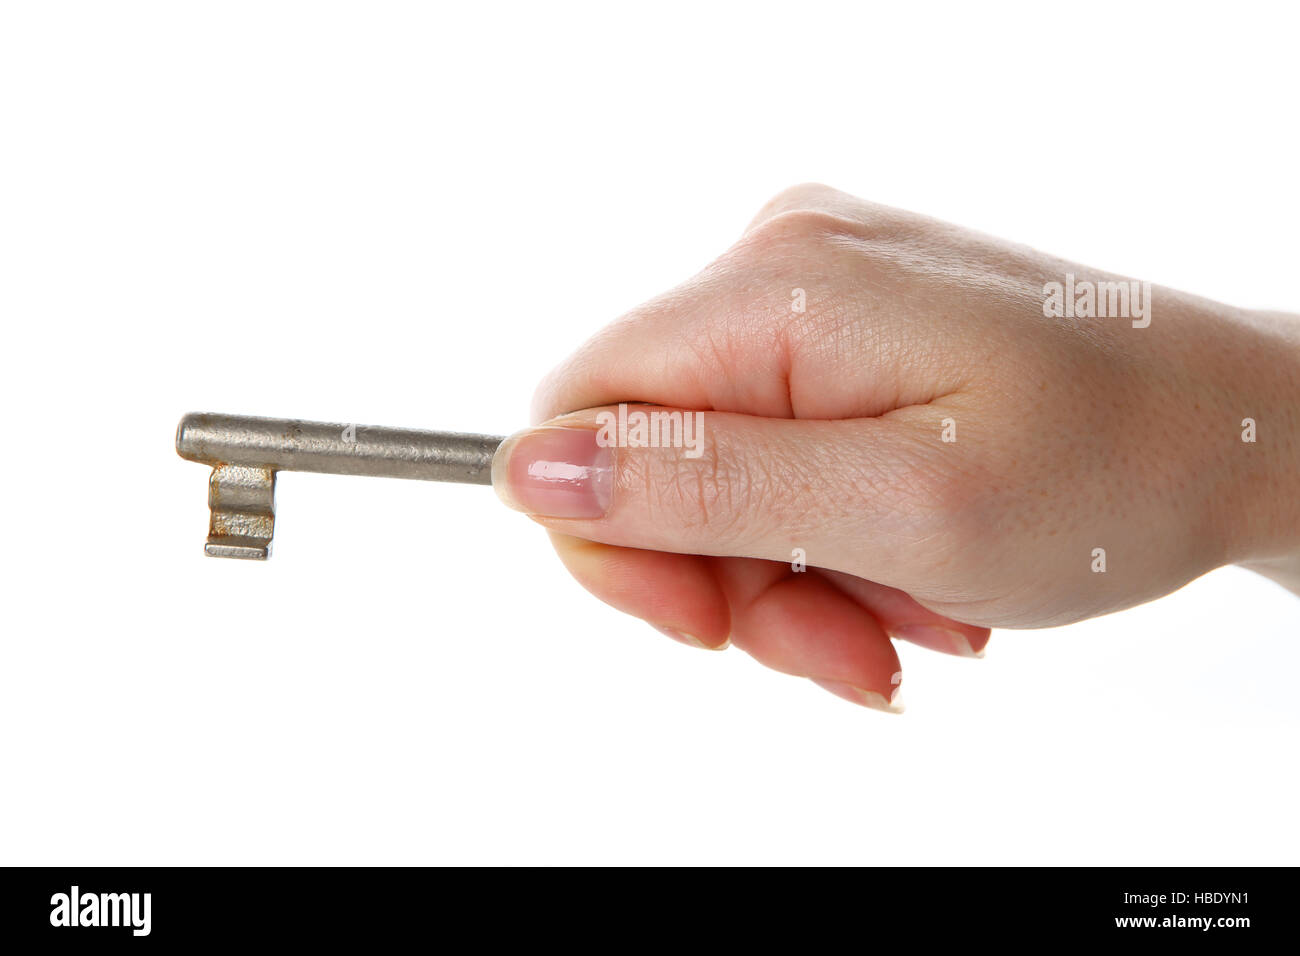 hand with key Stock Photo